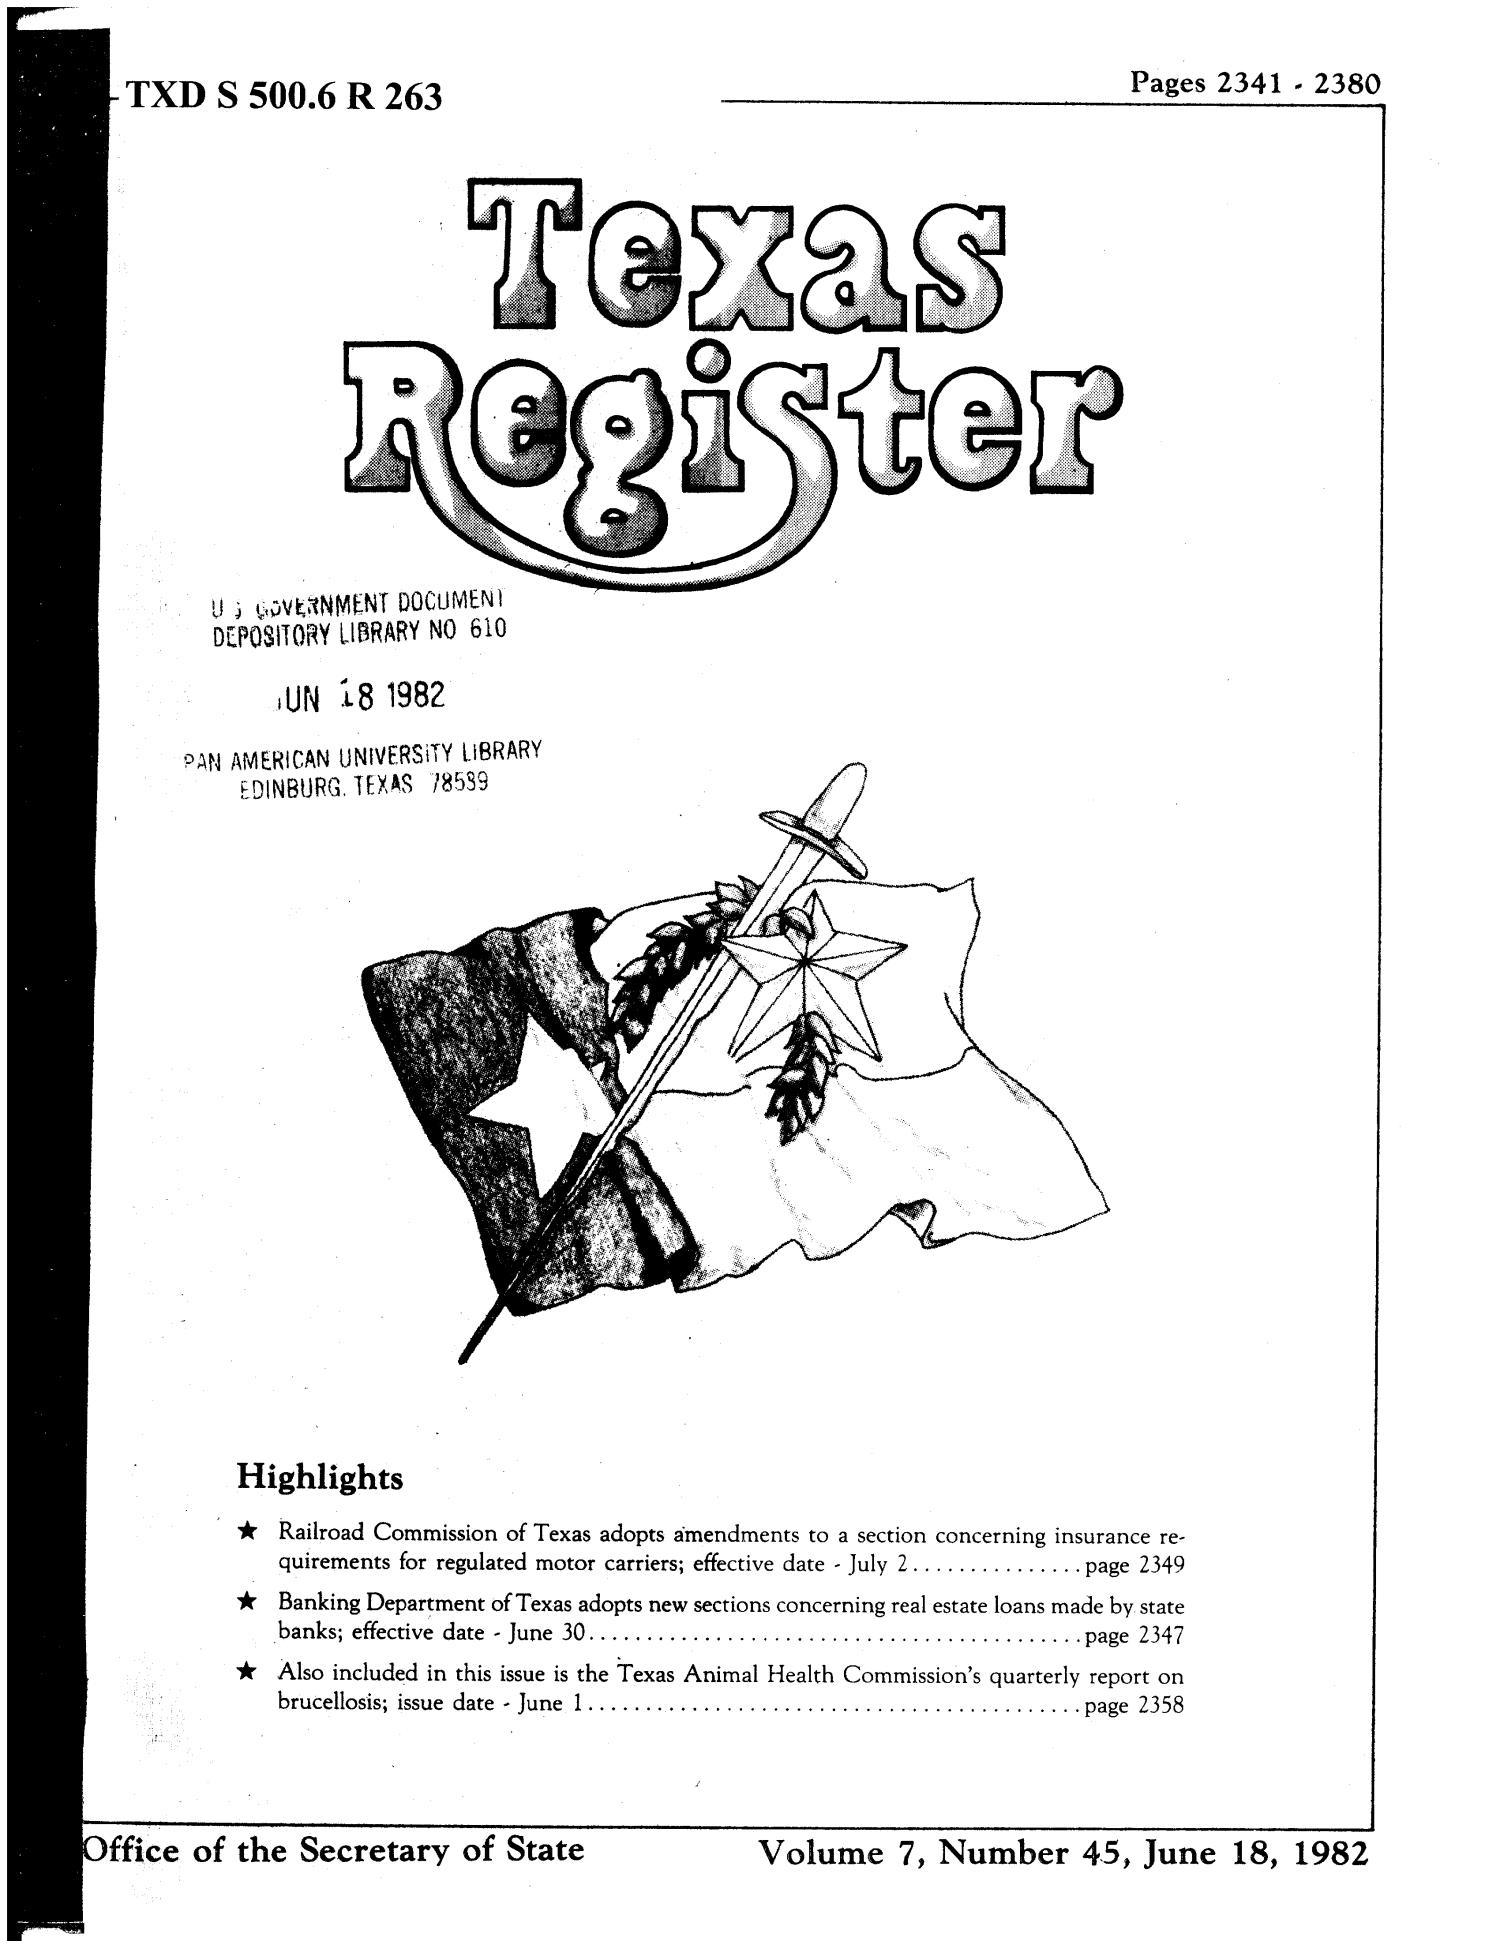 Texas Register, Volume 7, Number 45, Pages 2341-2380, June 18, 1982
                                                
                                                    Title Page
                                                